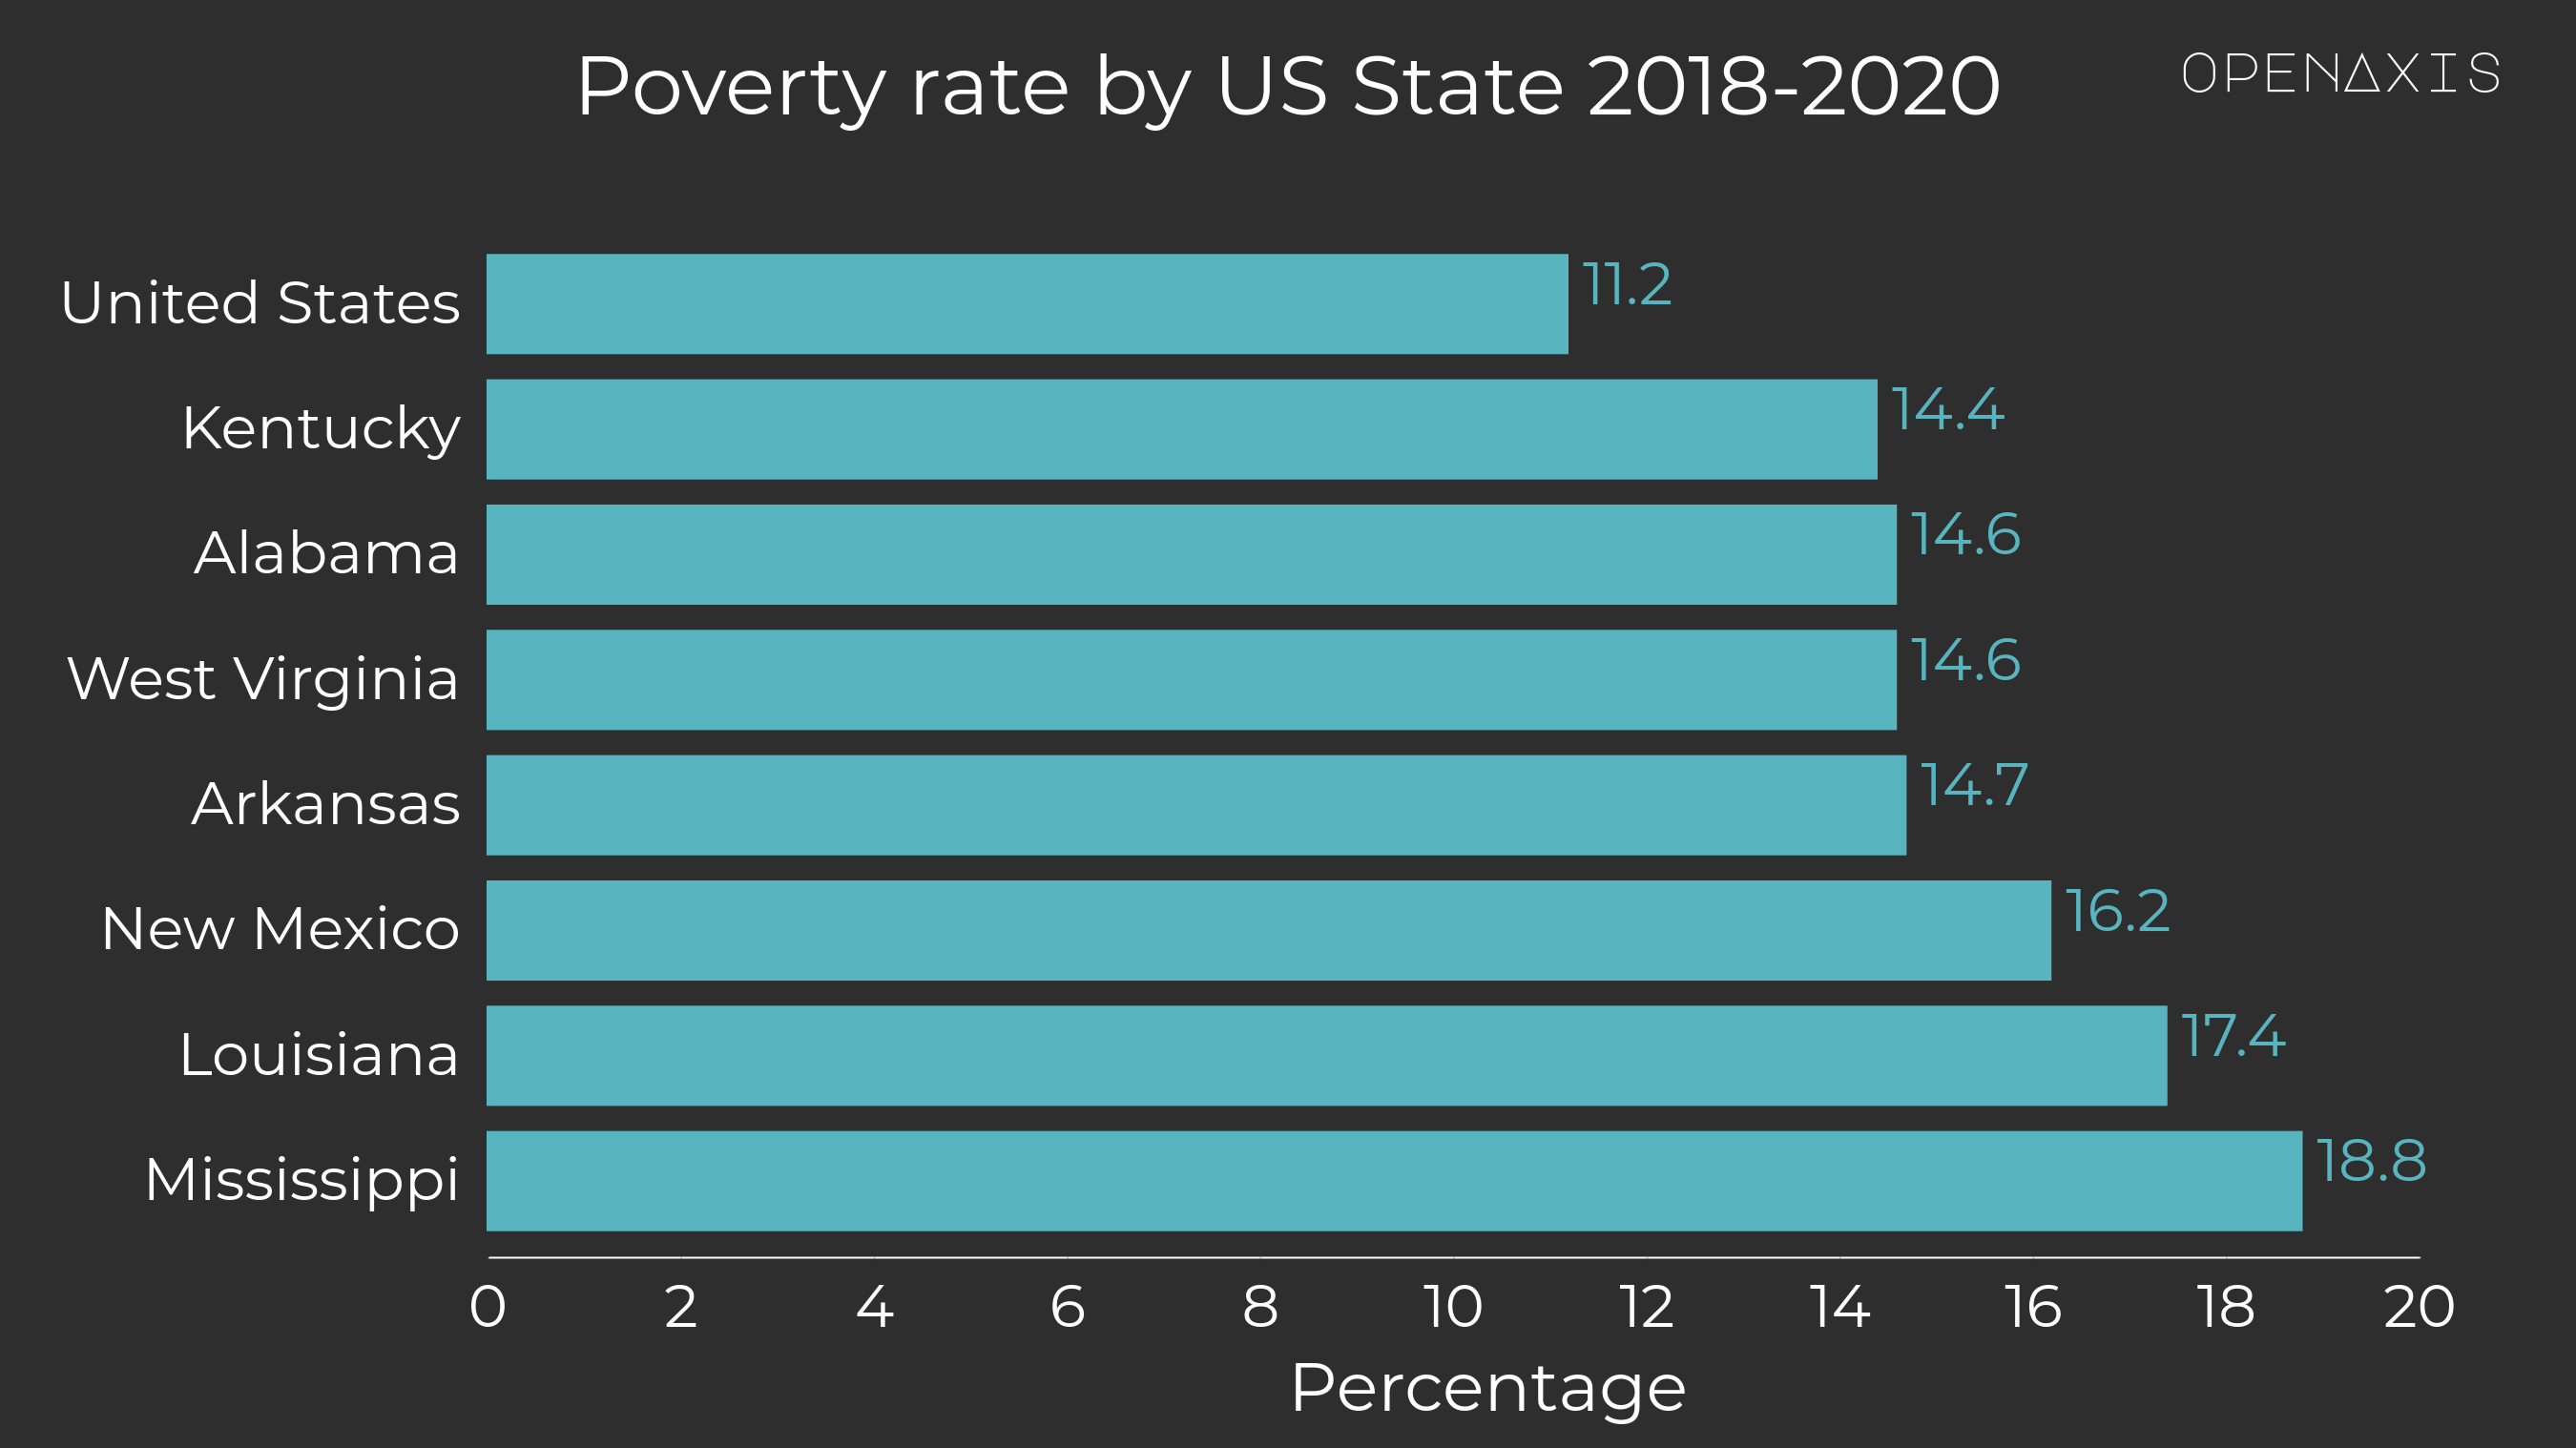 "Poverty rate by US State 2018-2020"